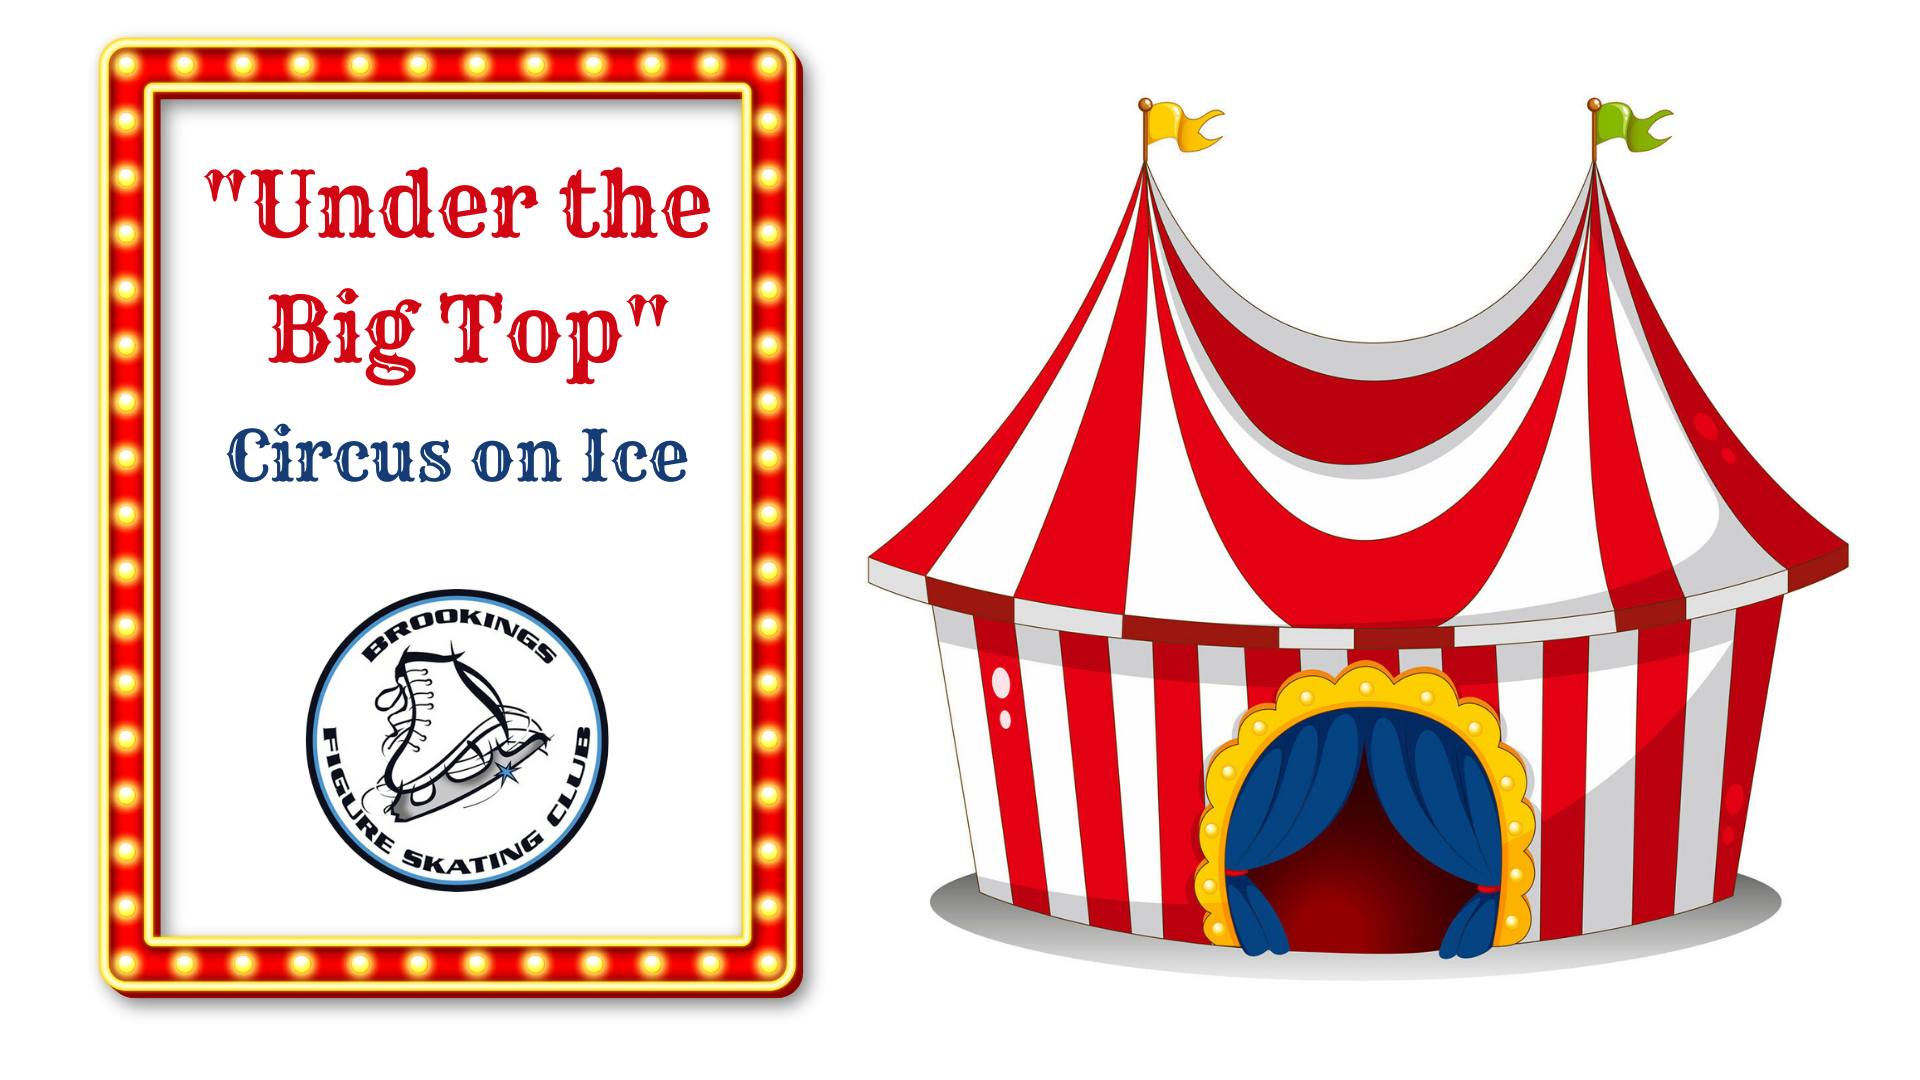 Annual Ice Show “Under the Big Top”